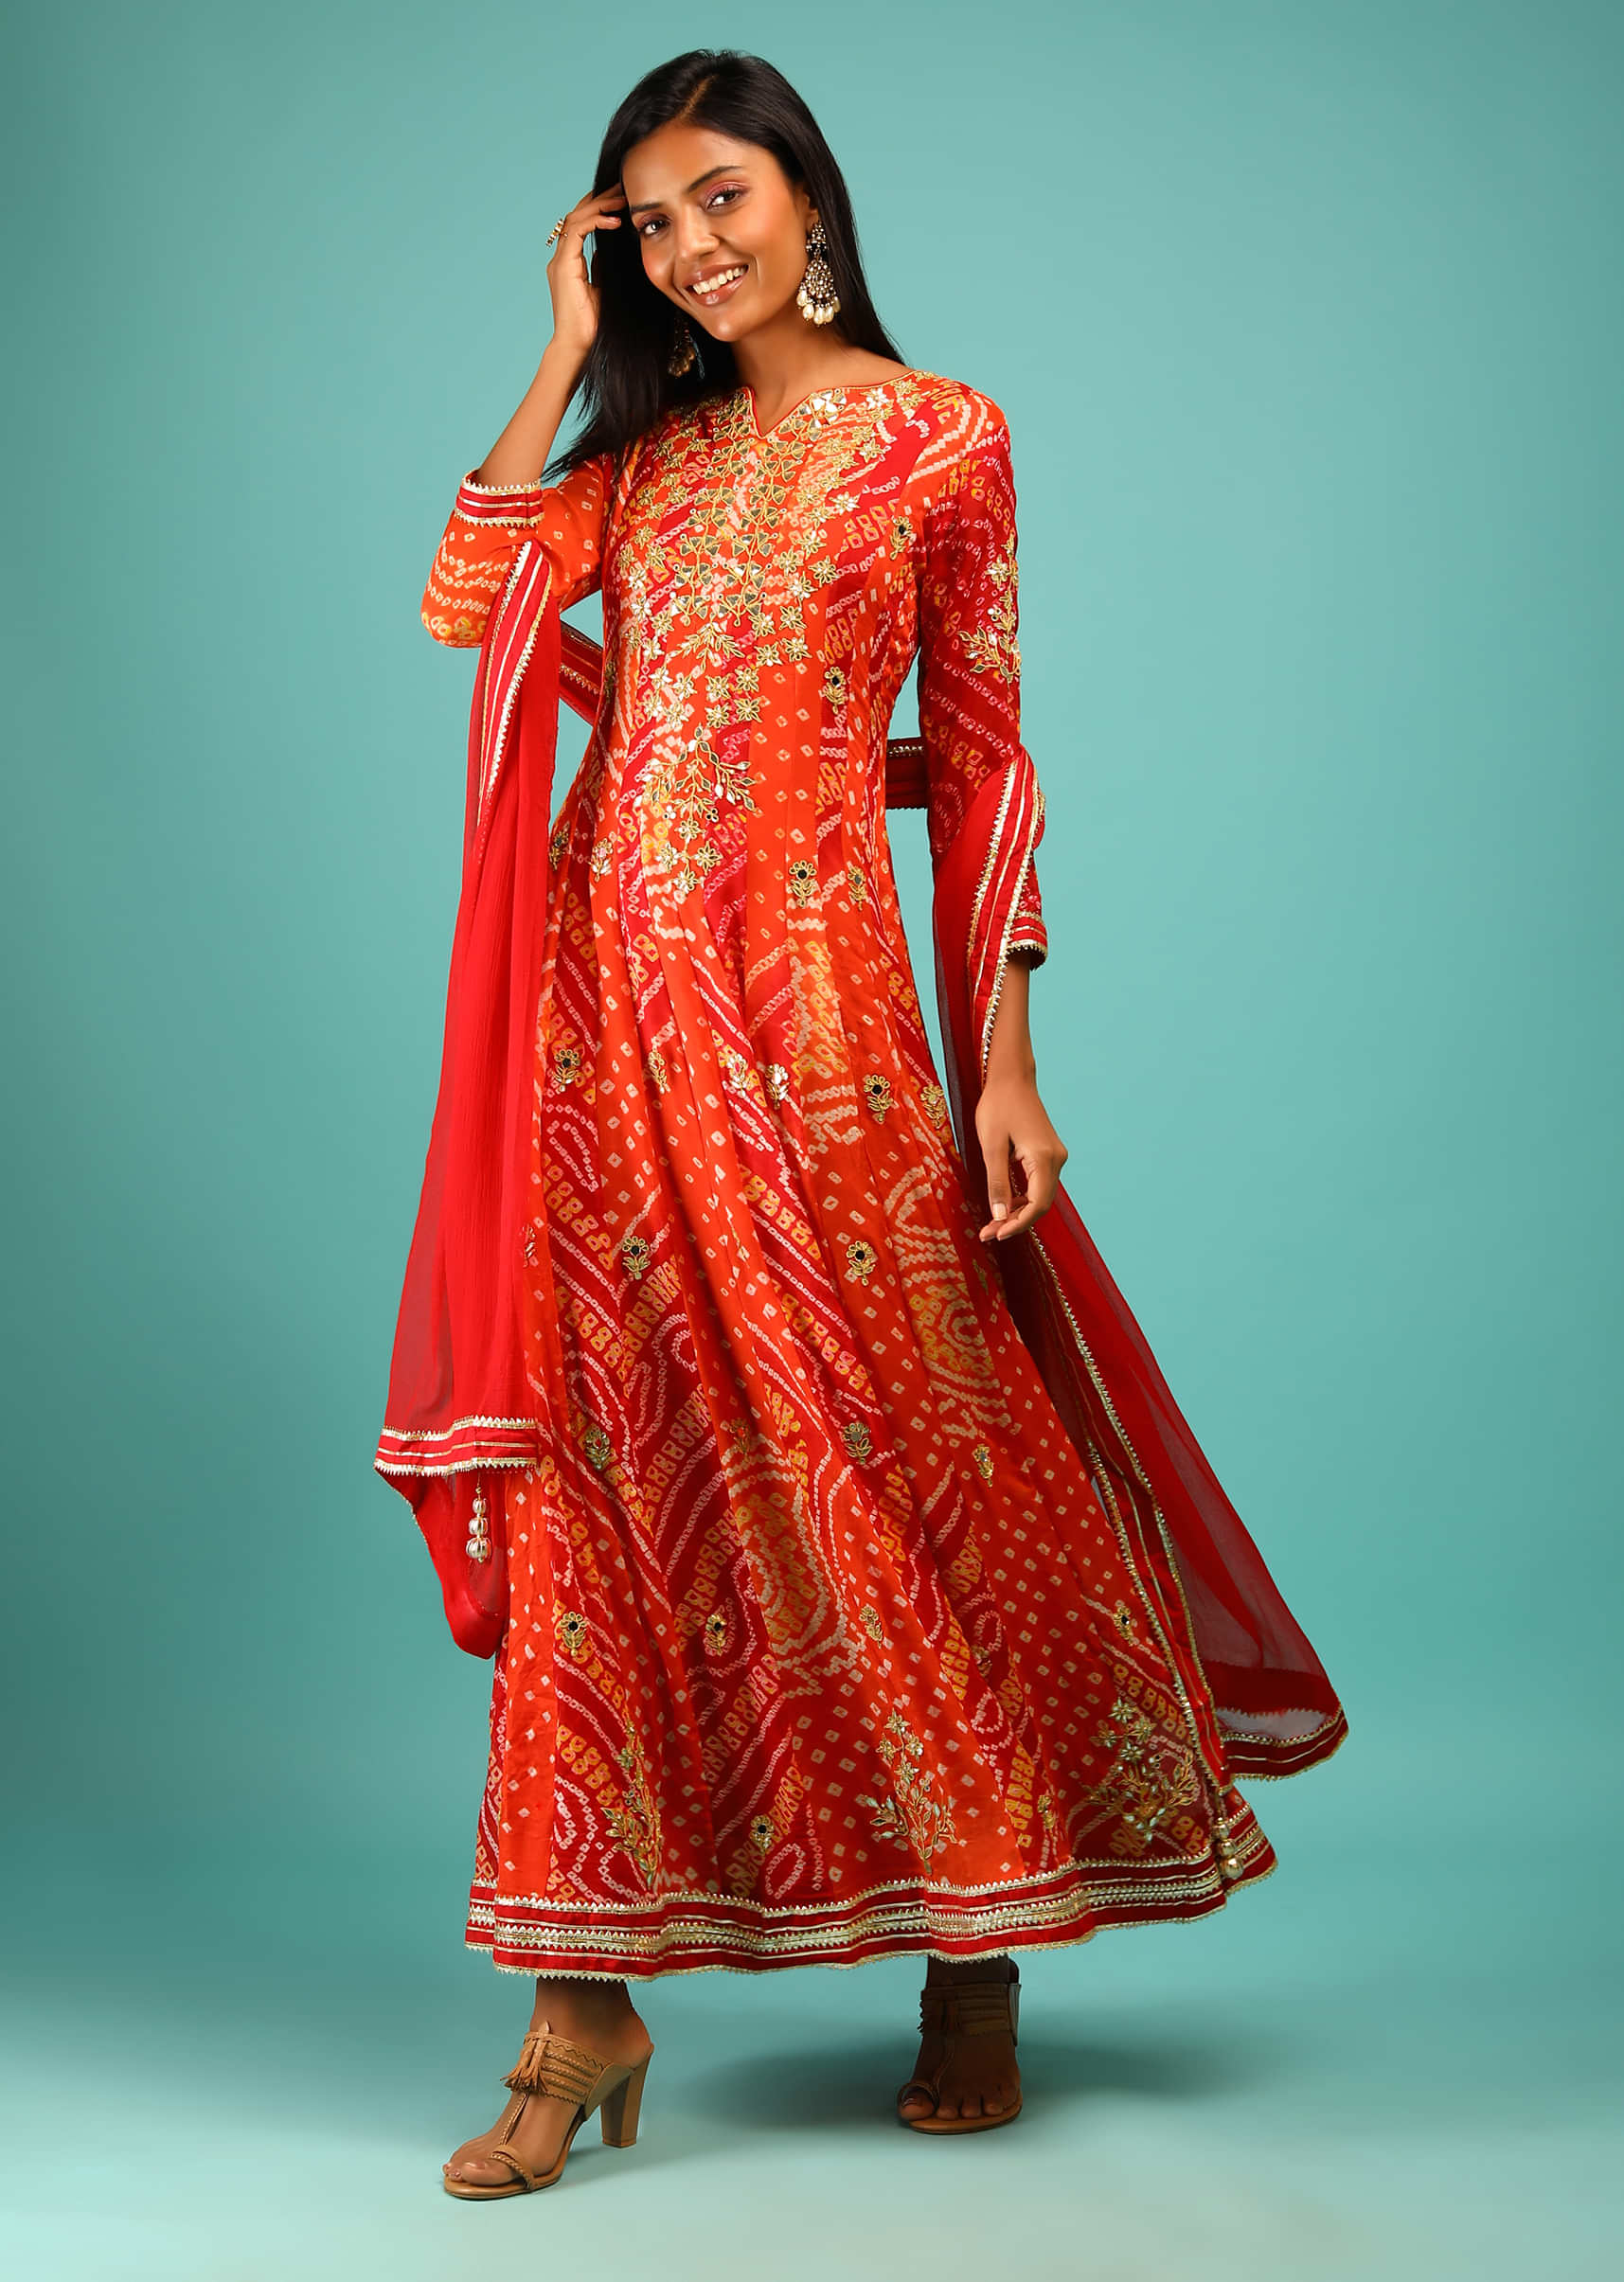 Red And Orange Panelled Anarkali Suit In Chiffon With Bandhani And Gotta Patti Embroidery